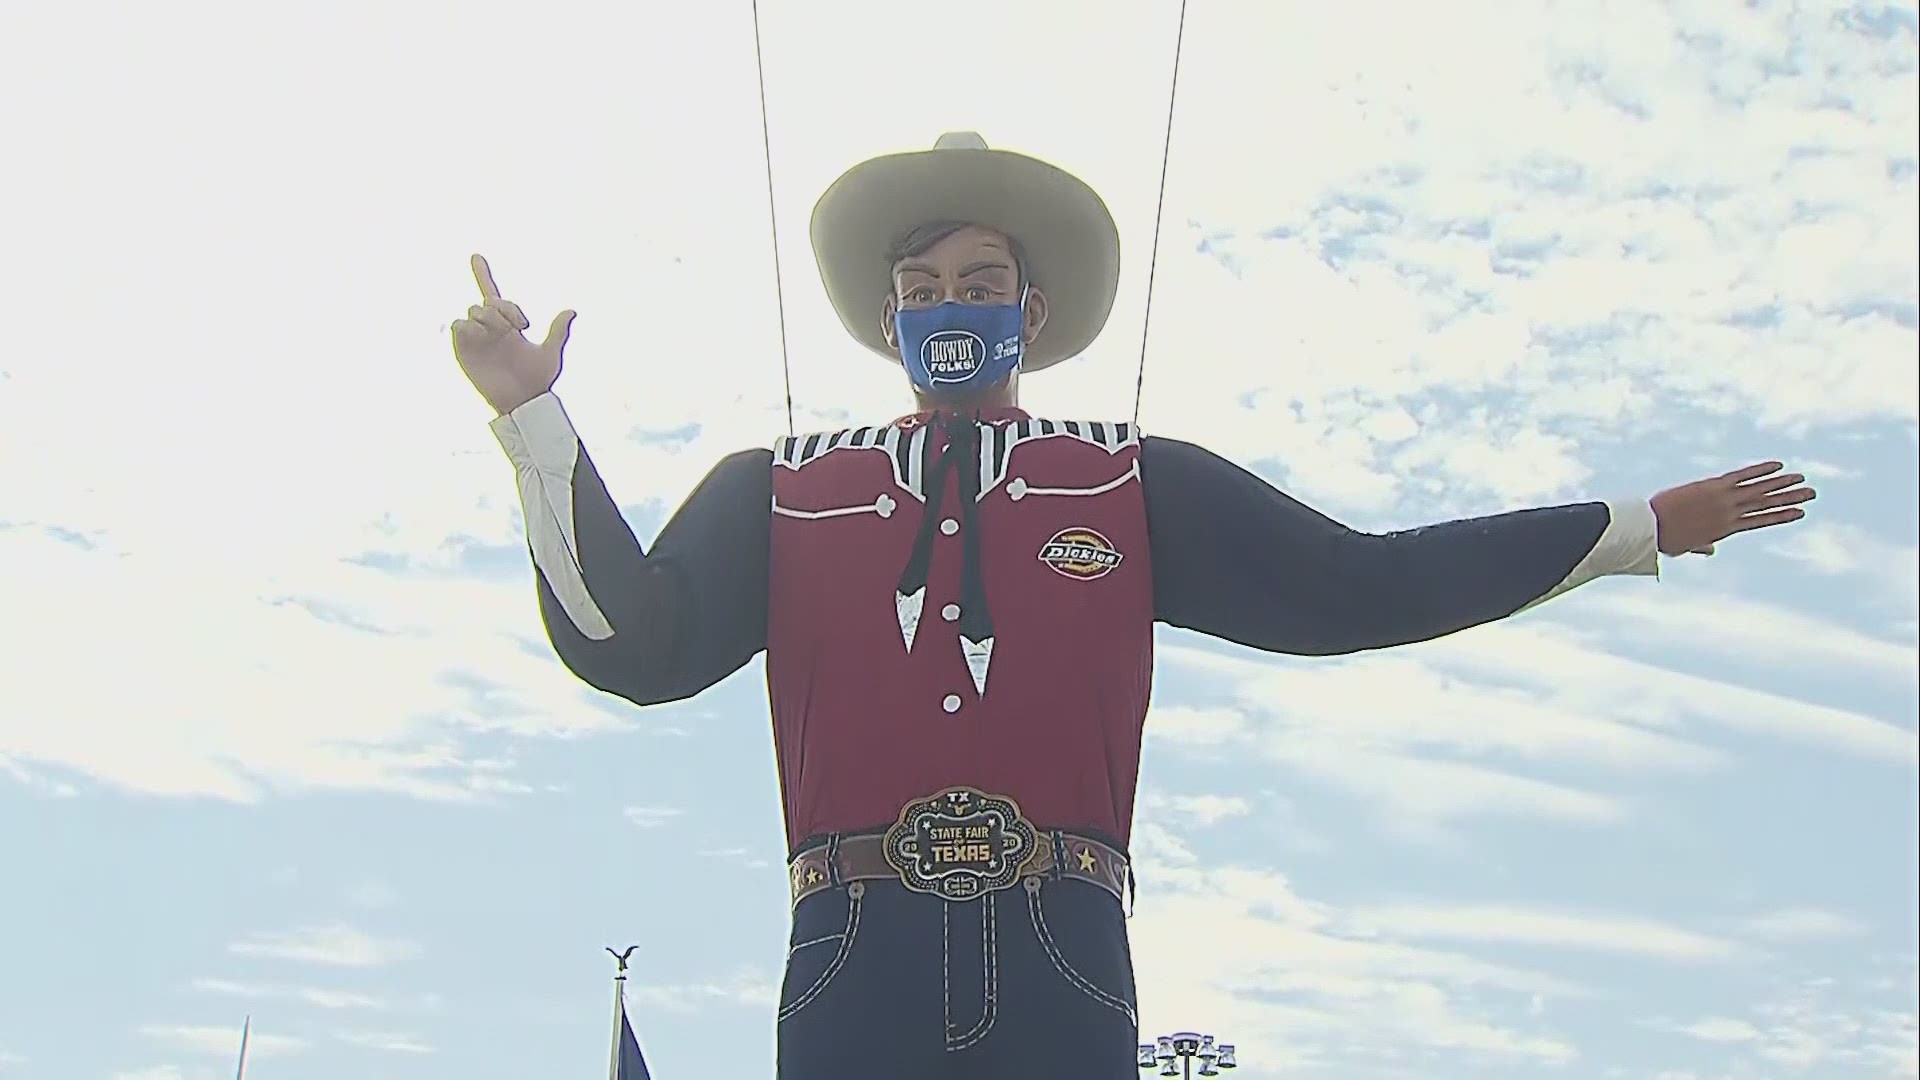 Even though the State Fair of Texas was canceled this year due to COVID-19, DFW residents can still get their annual picture with Big Tex and eat fair food.